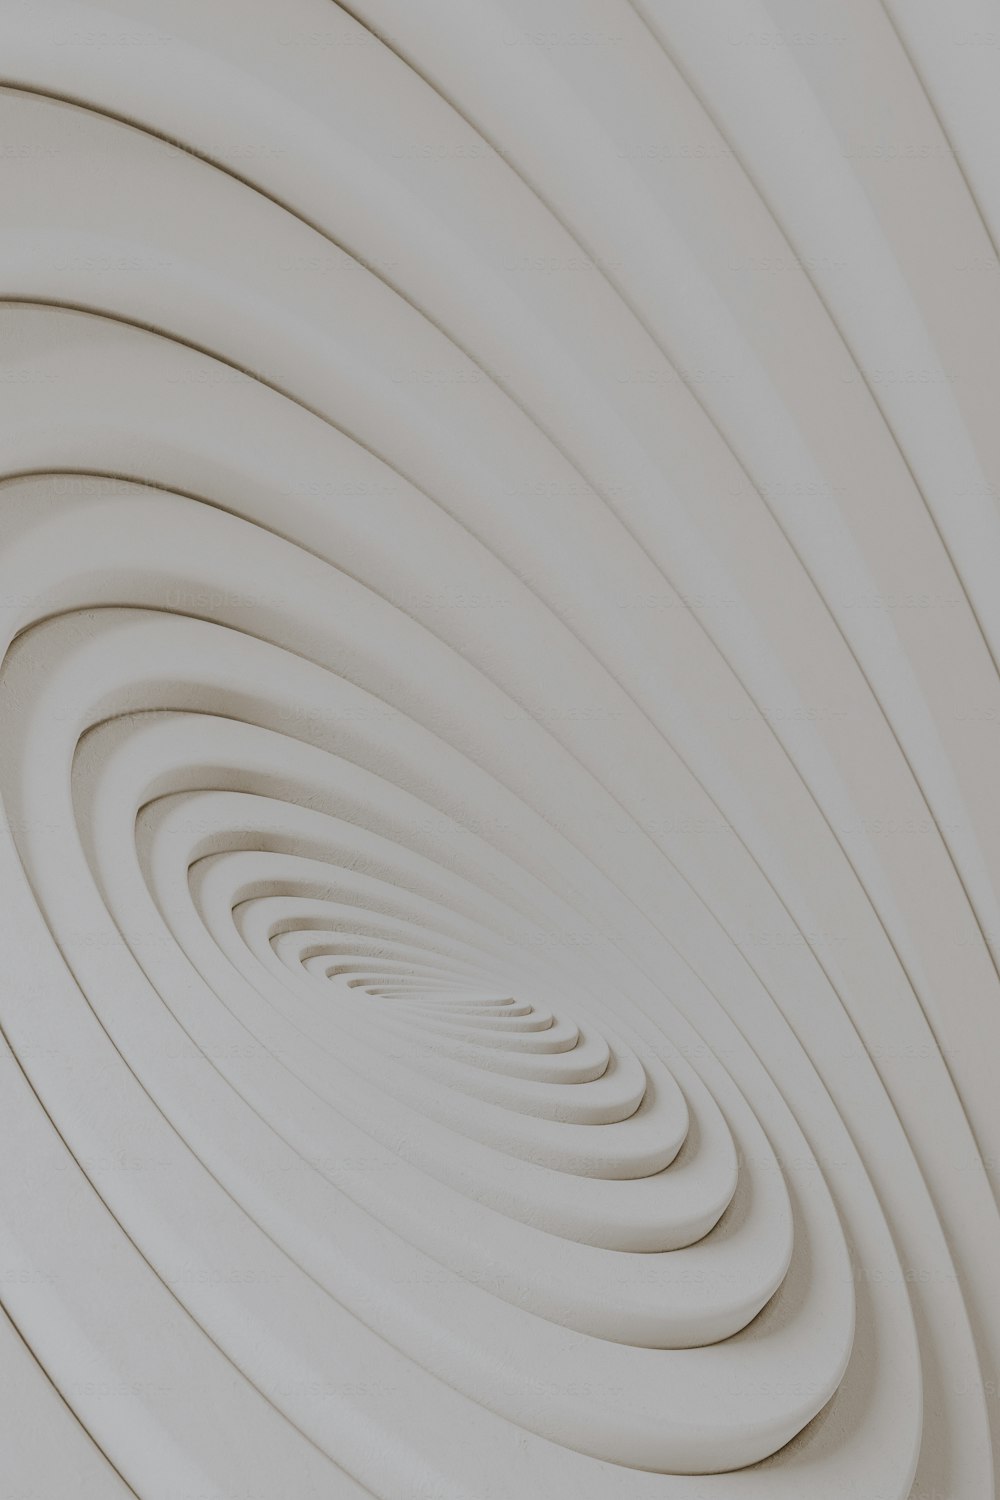 an abstract photo of a white spiral design